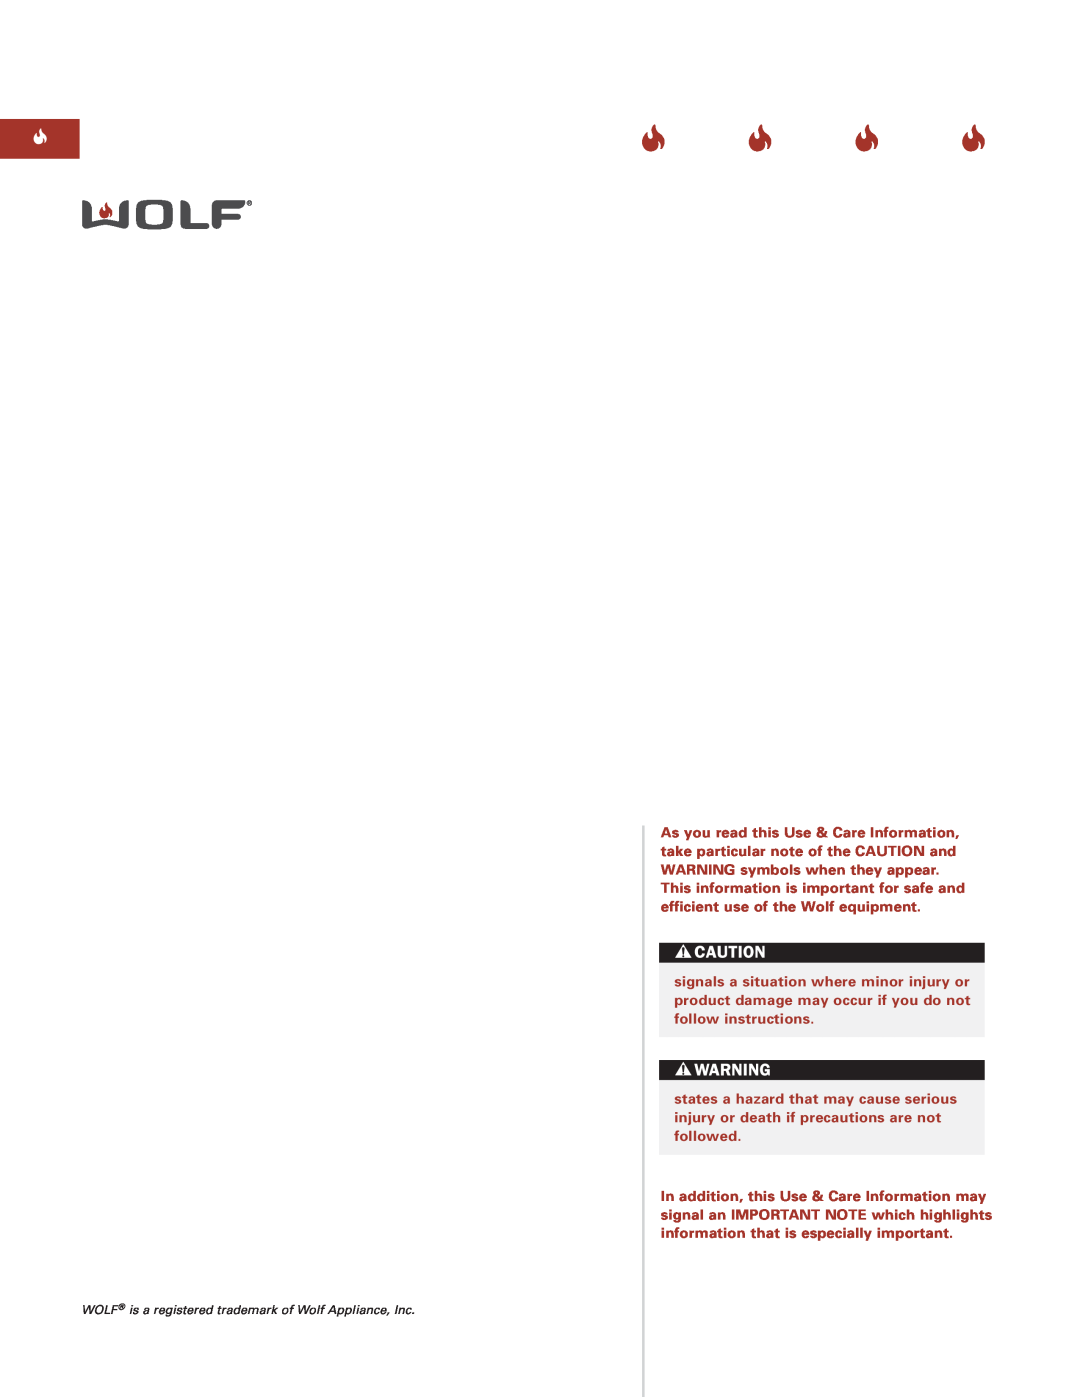 Sub-Zero Sealed Burner RangeTop manual WOLF is a registered trademark of Wolf Appliance, Inc 